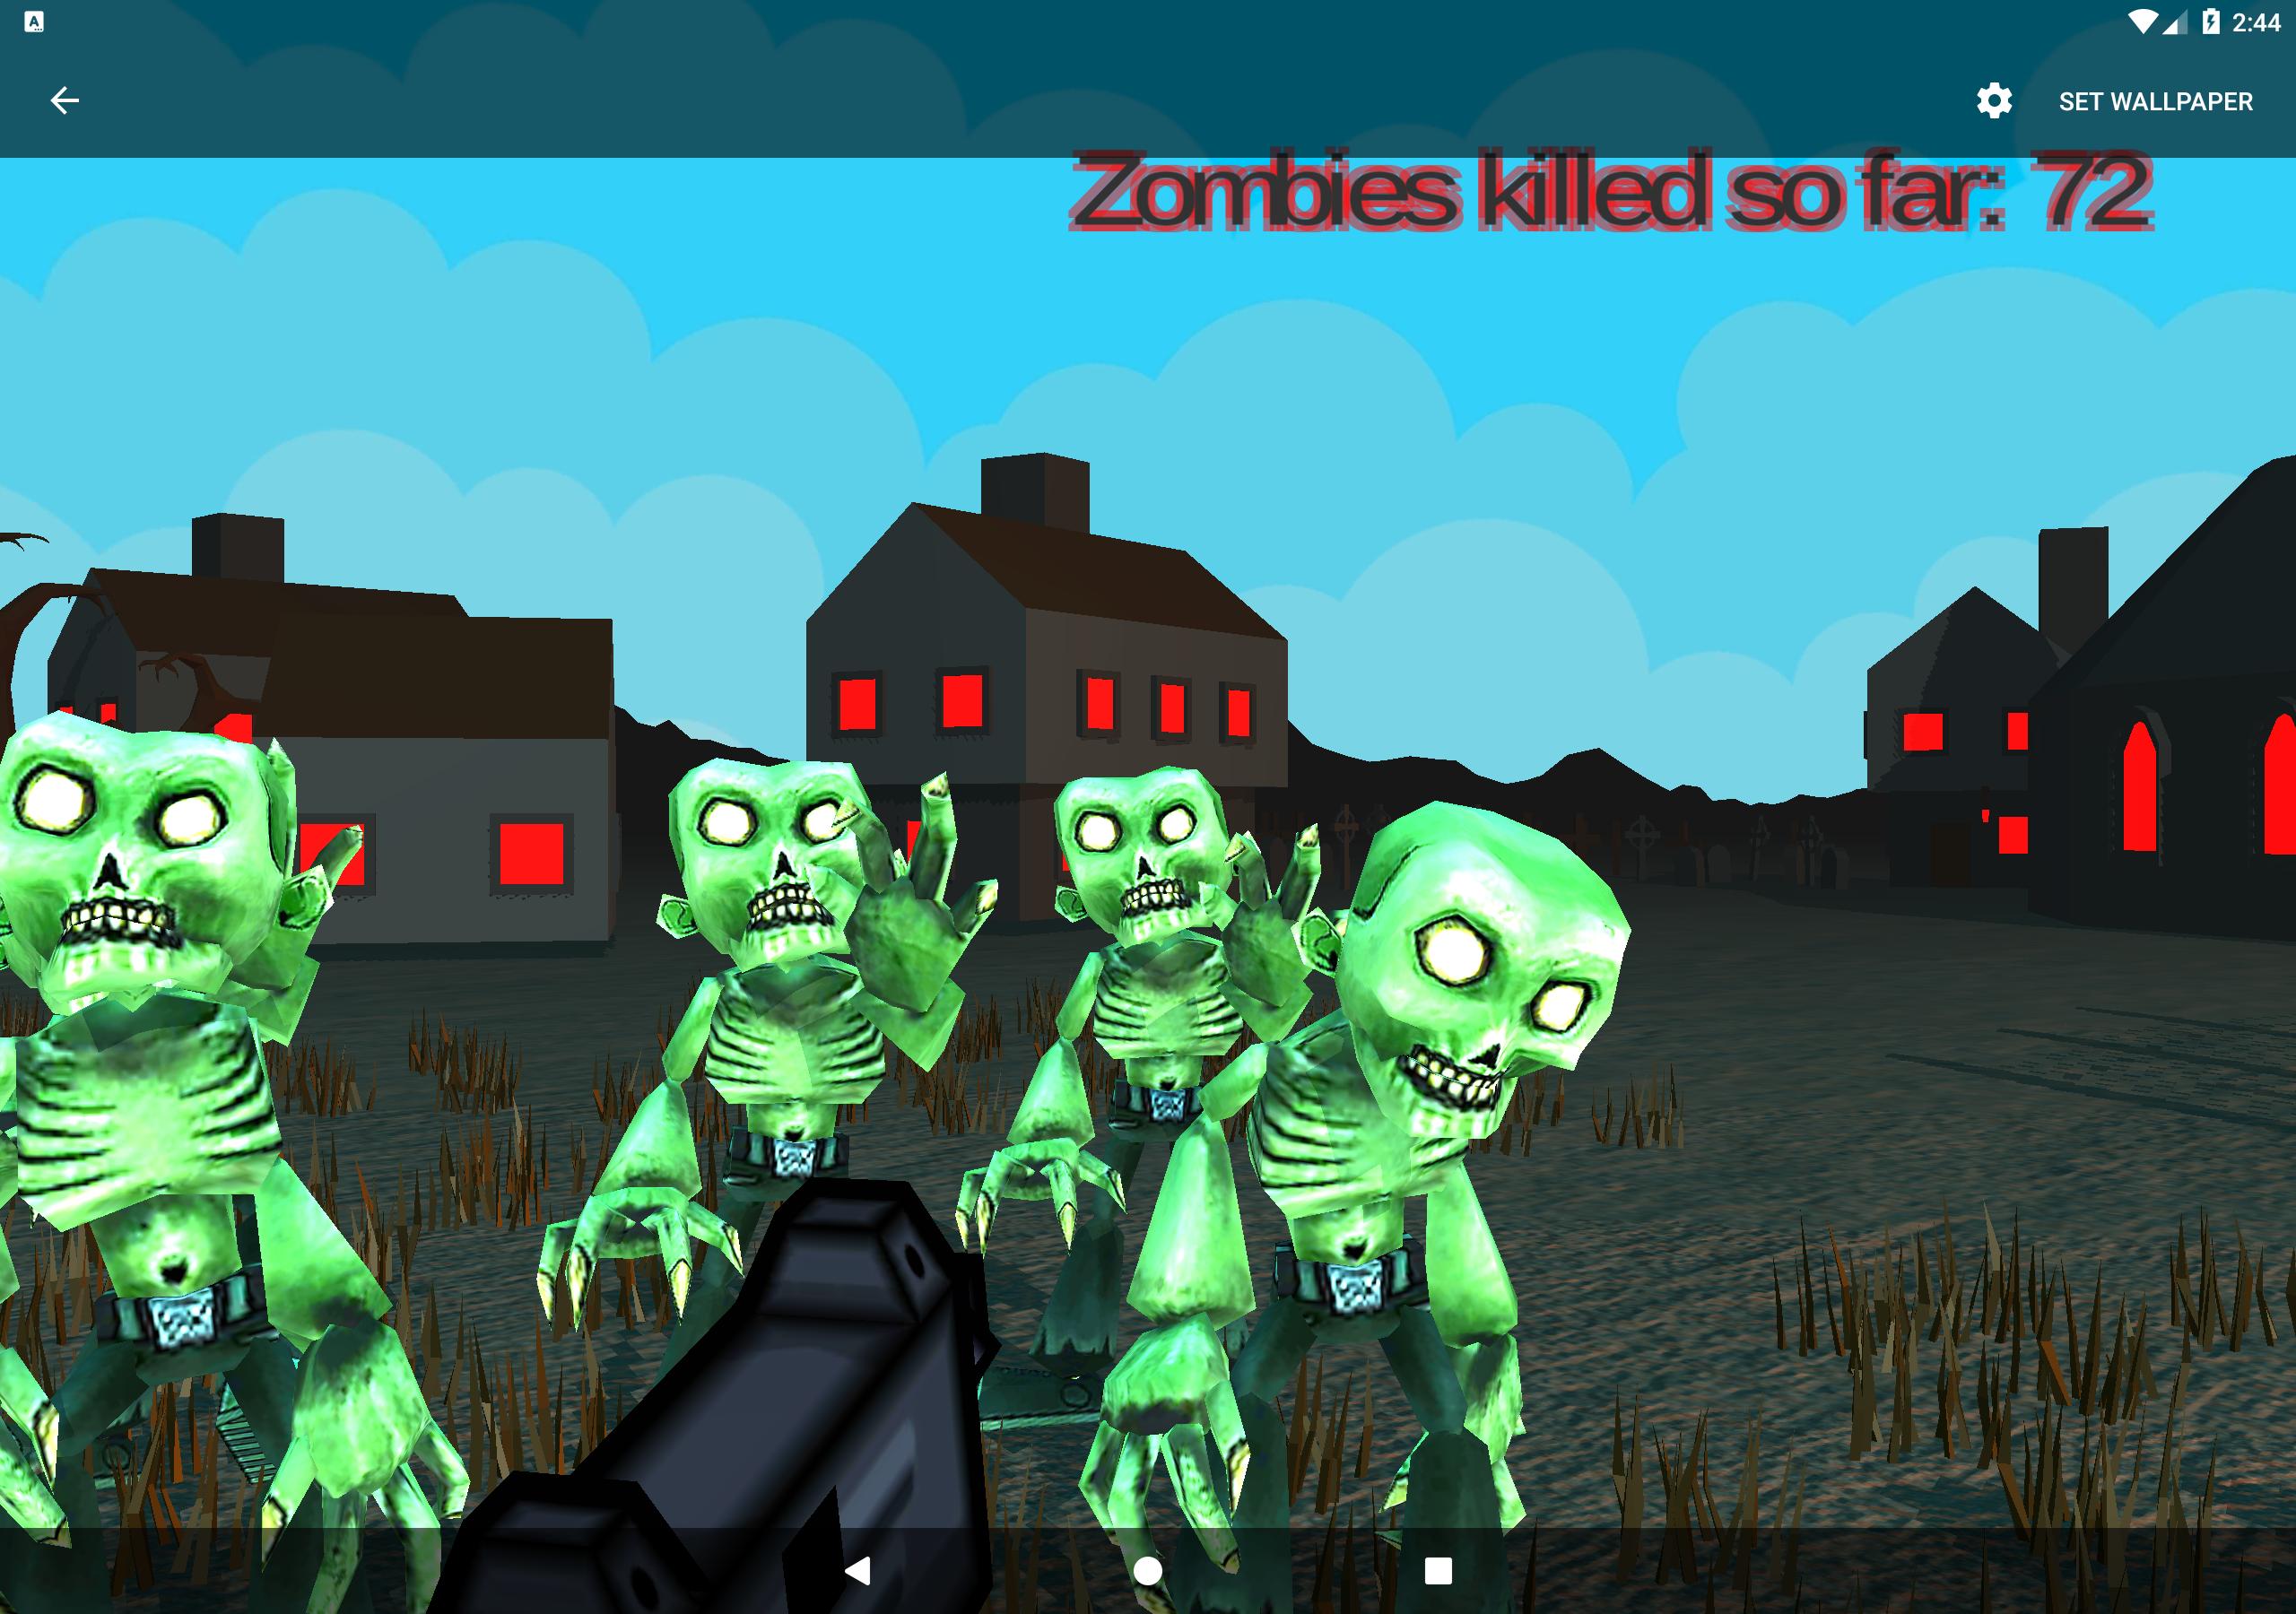 Zombie Invasion Interactive Live Wallpaper For Android